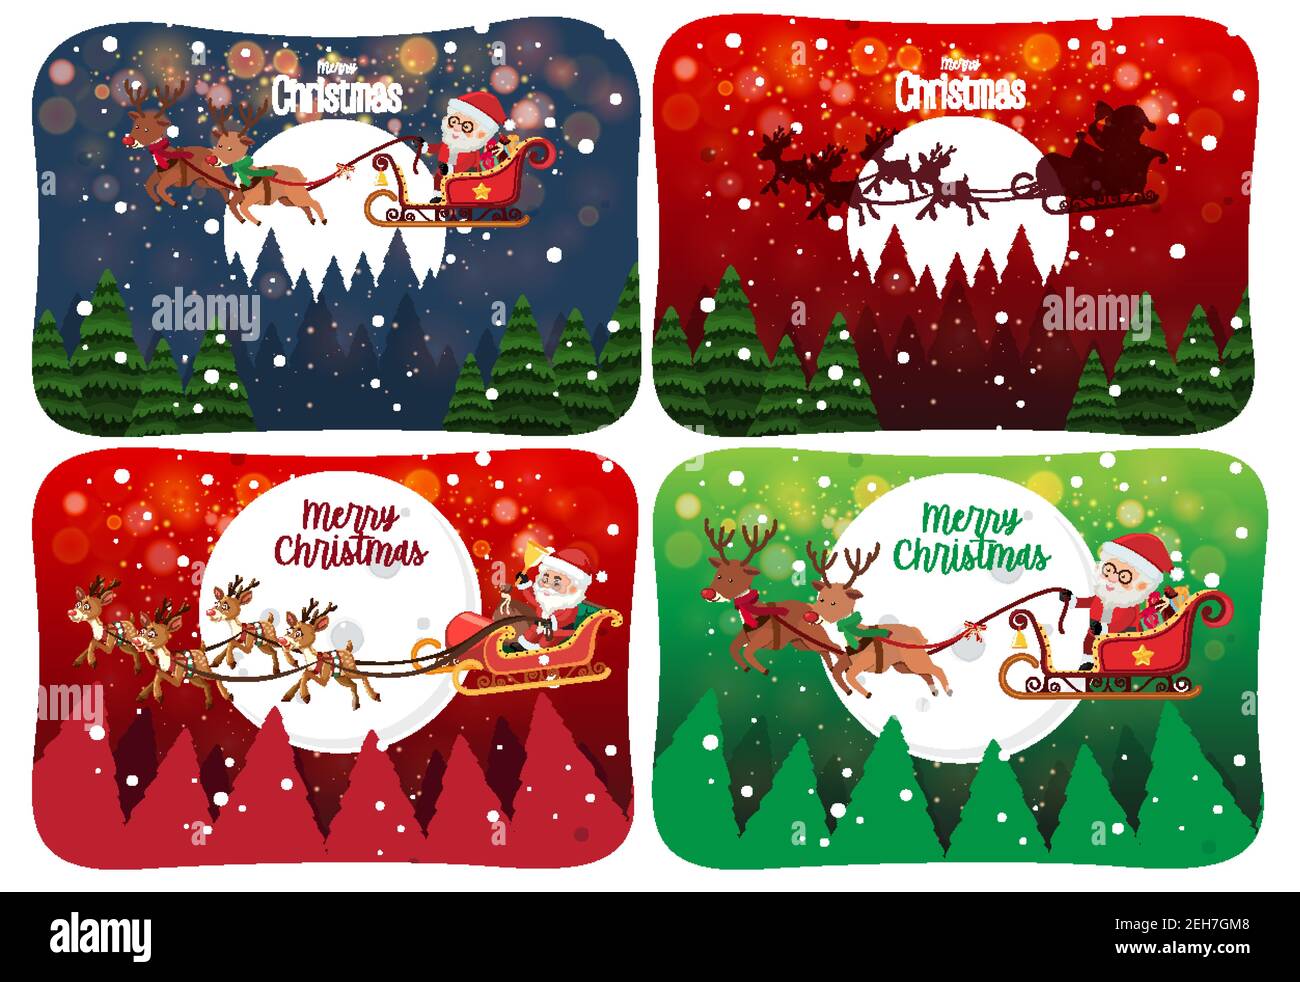 Set of Merry Christmas scene with Santa Claus in snow illustration Stock Vector